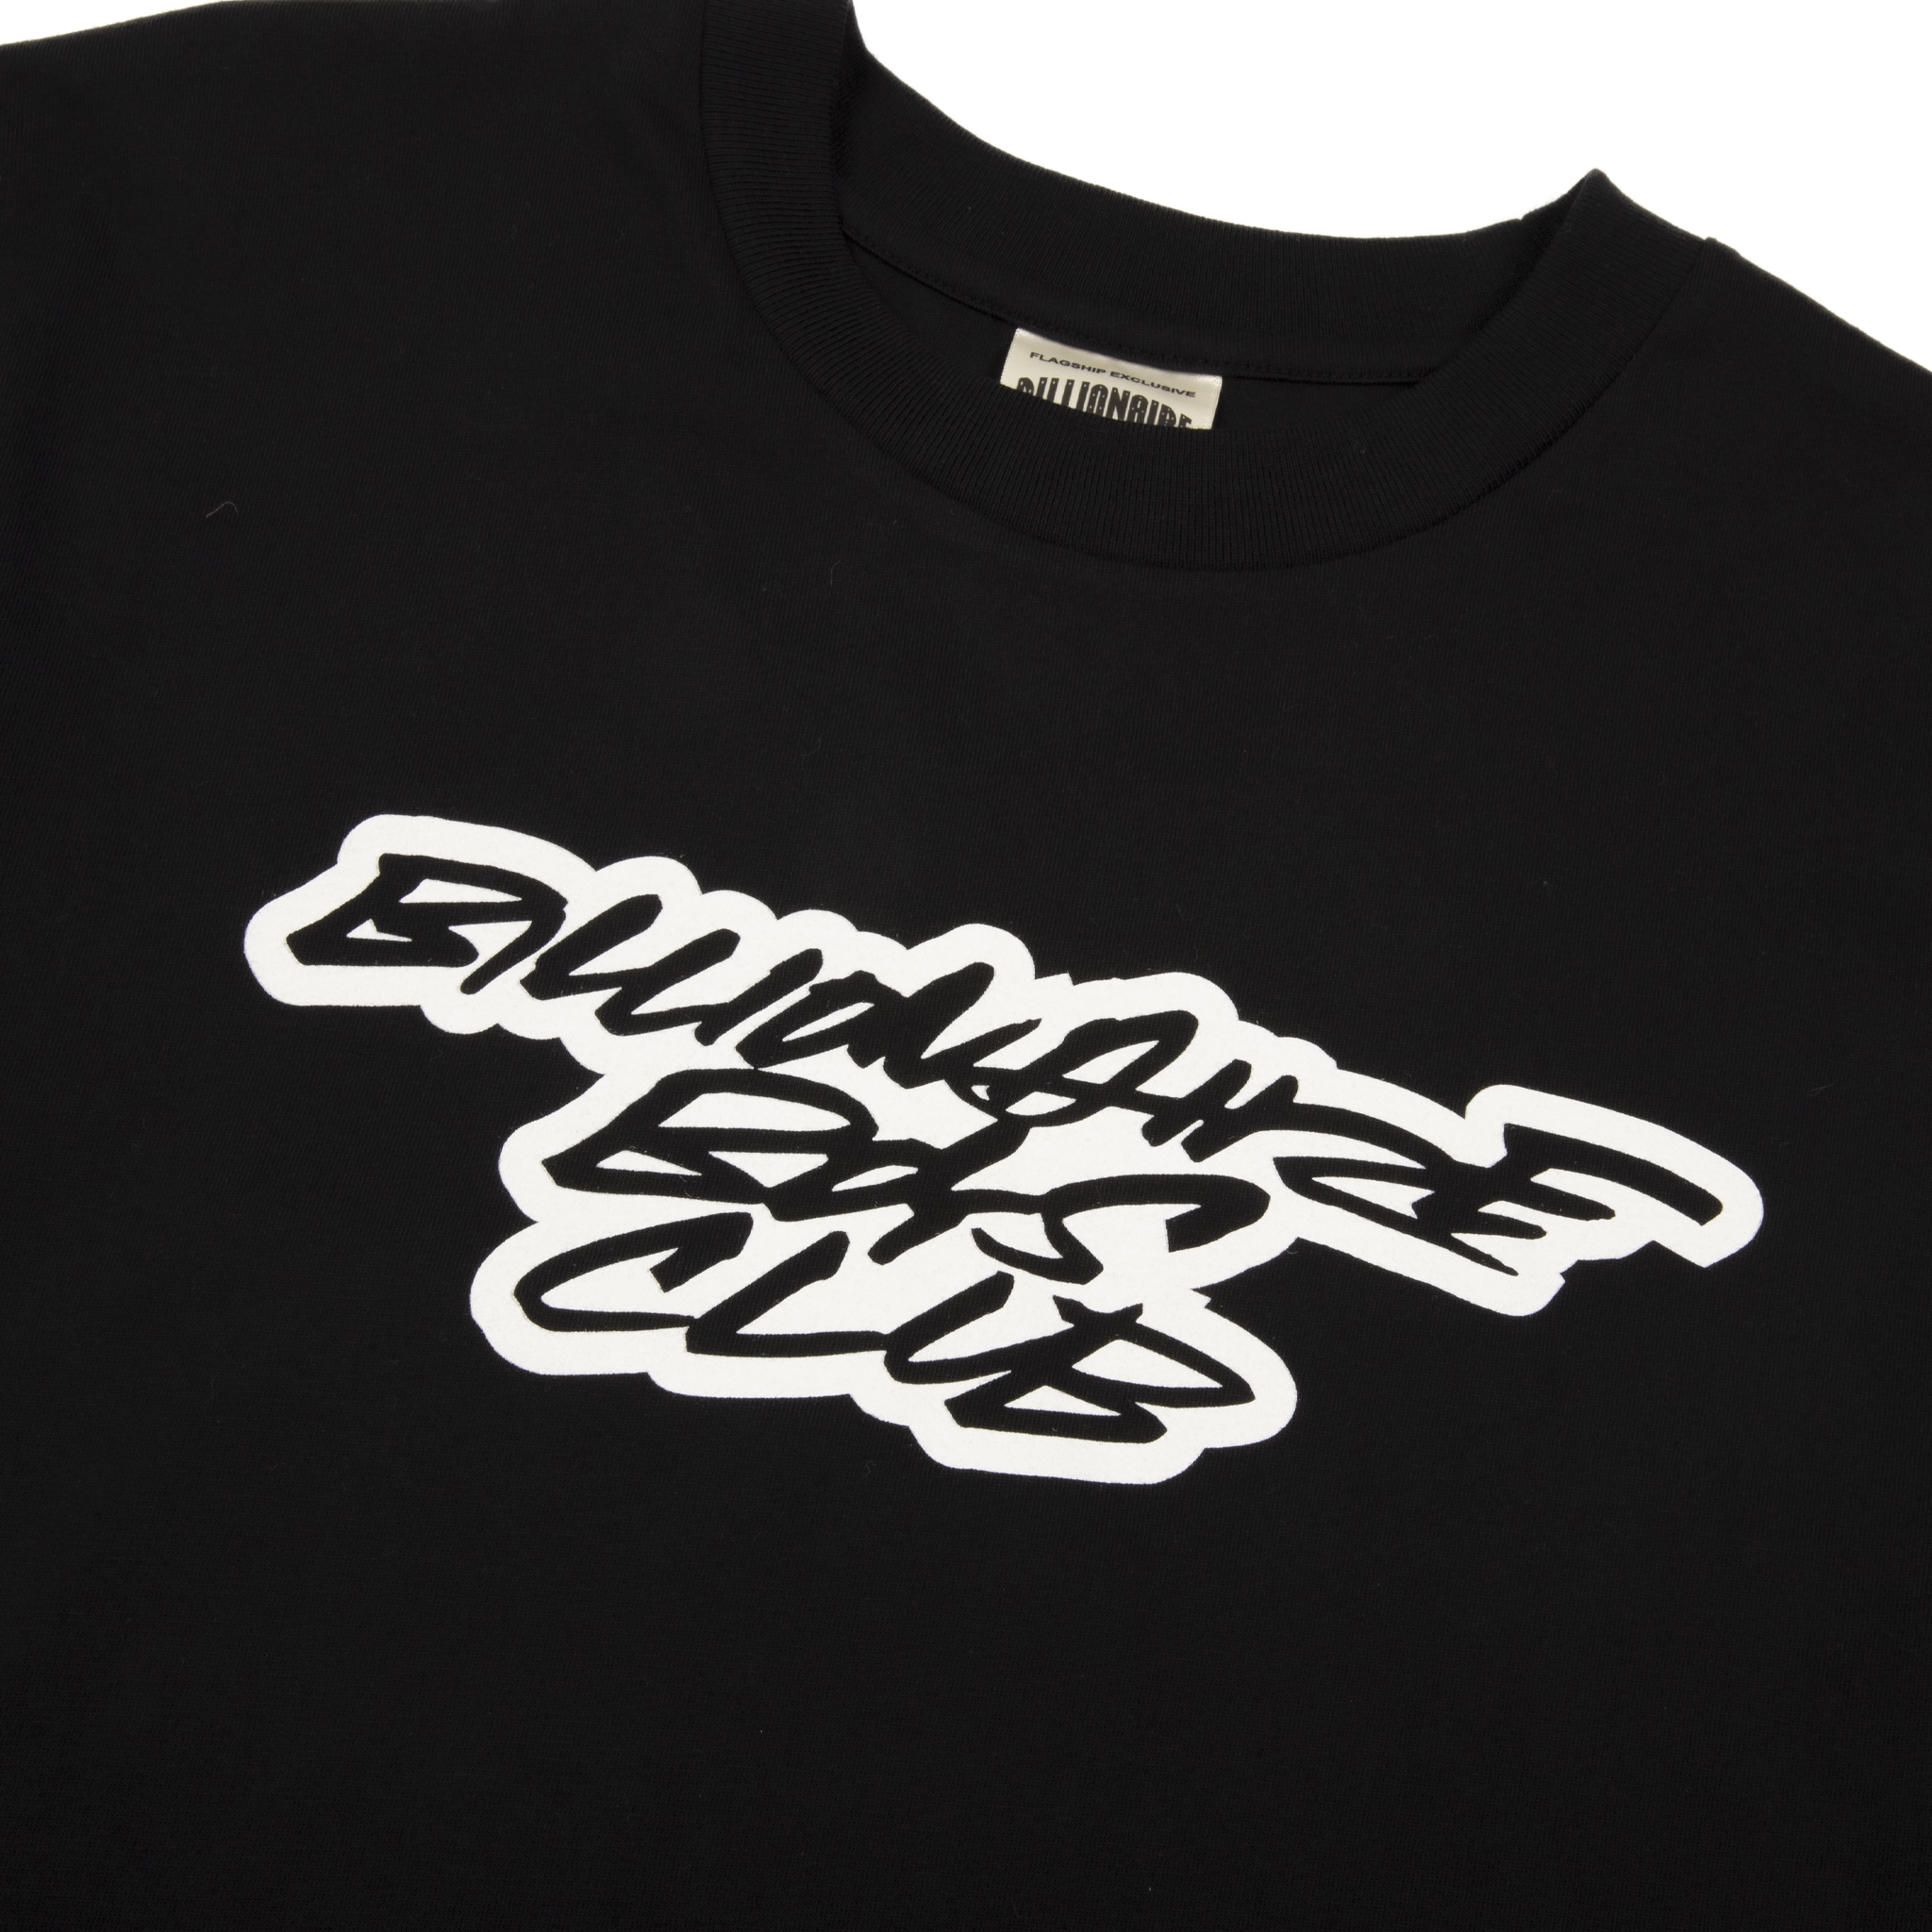 Rolling Loud Announces Merch Collab With Billionaire Boys Club for